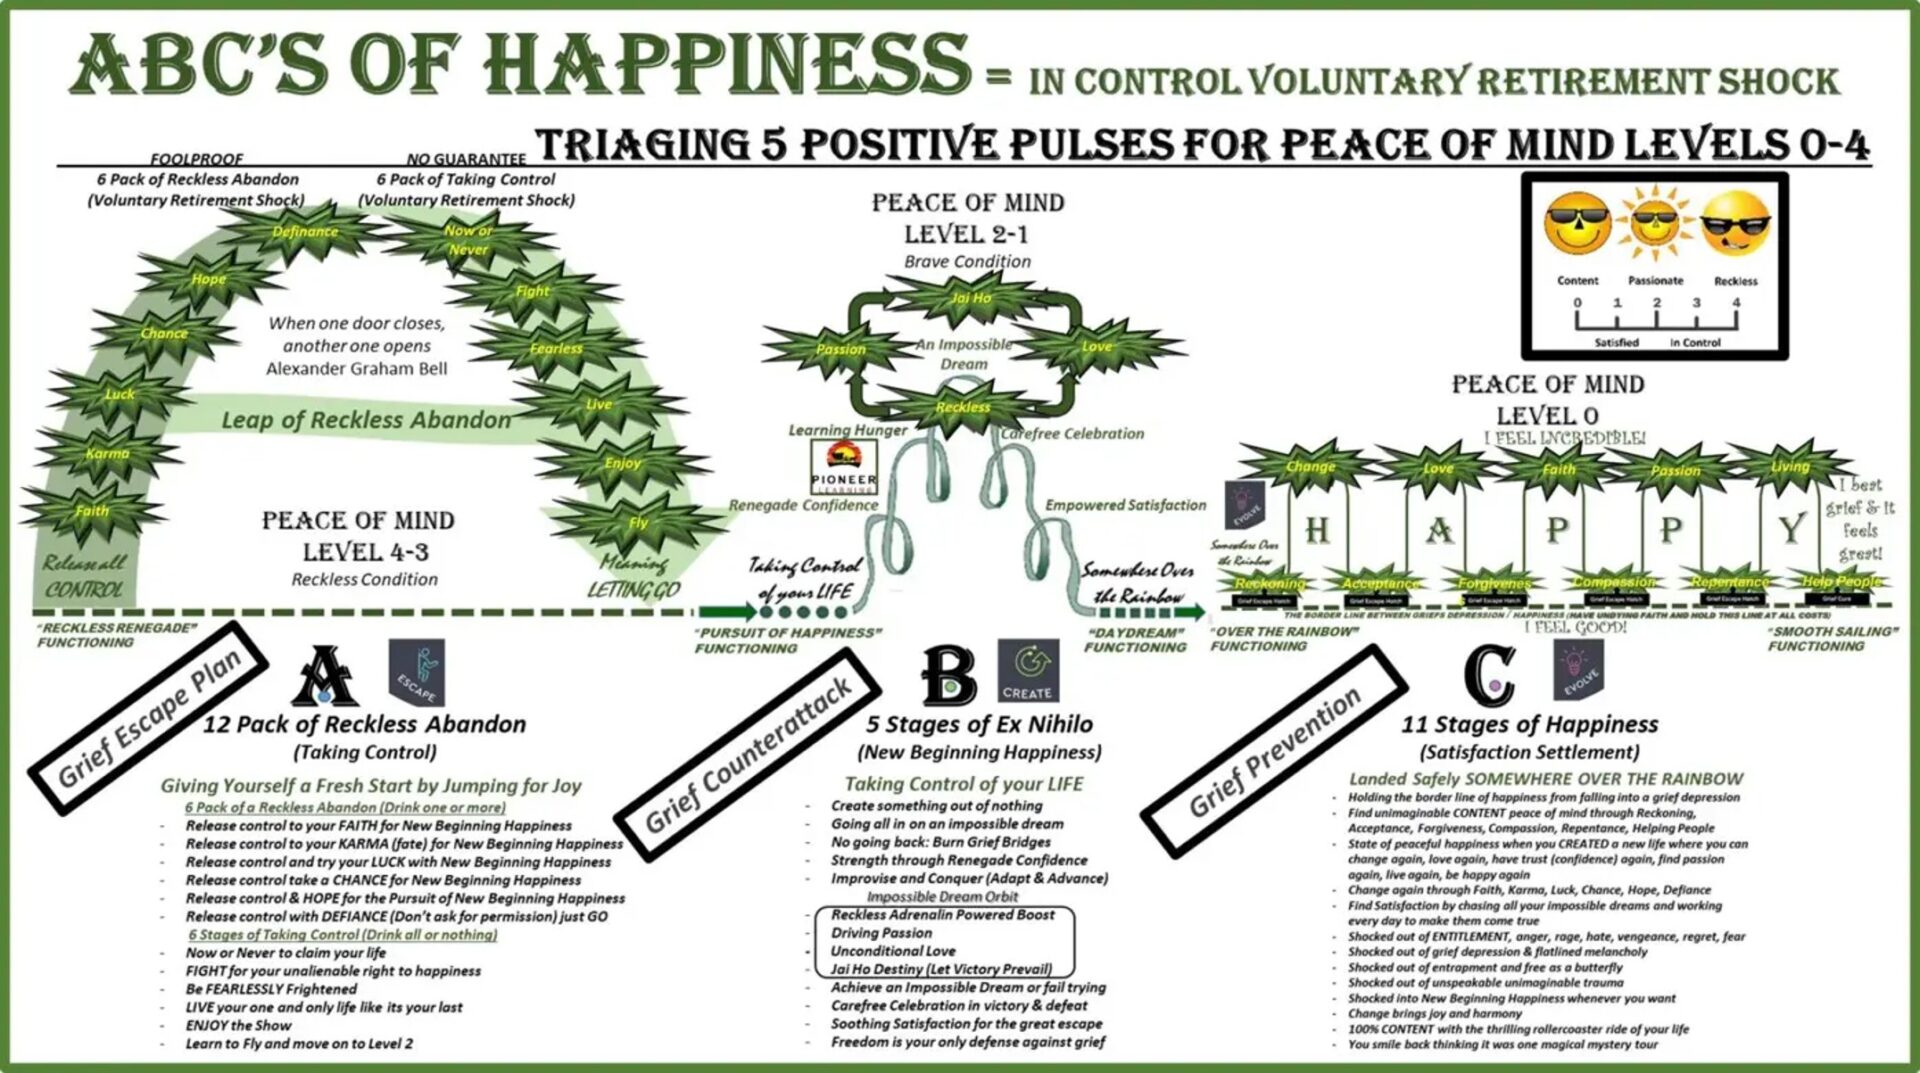 ABC's of Happiness Flow Chart